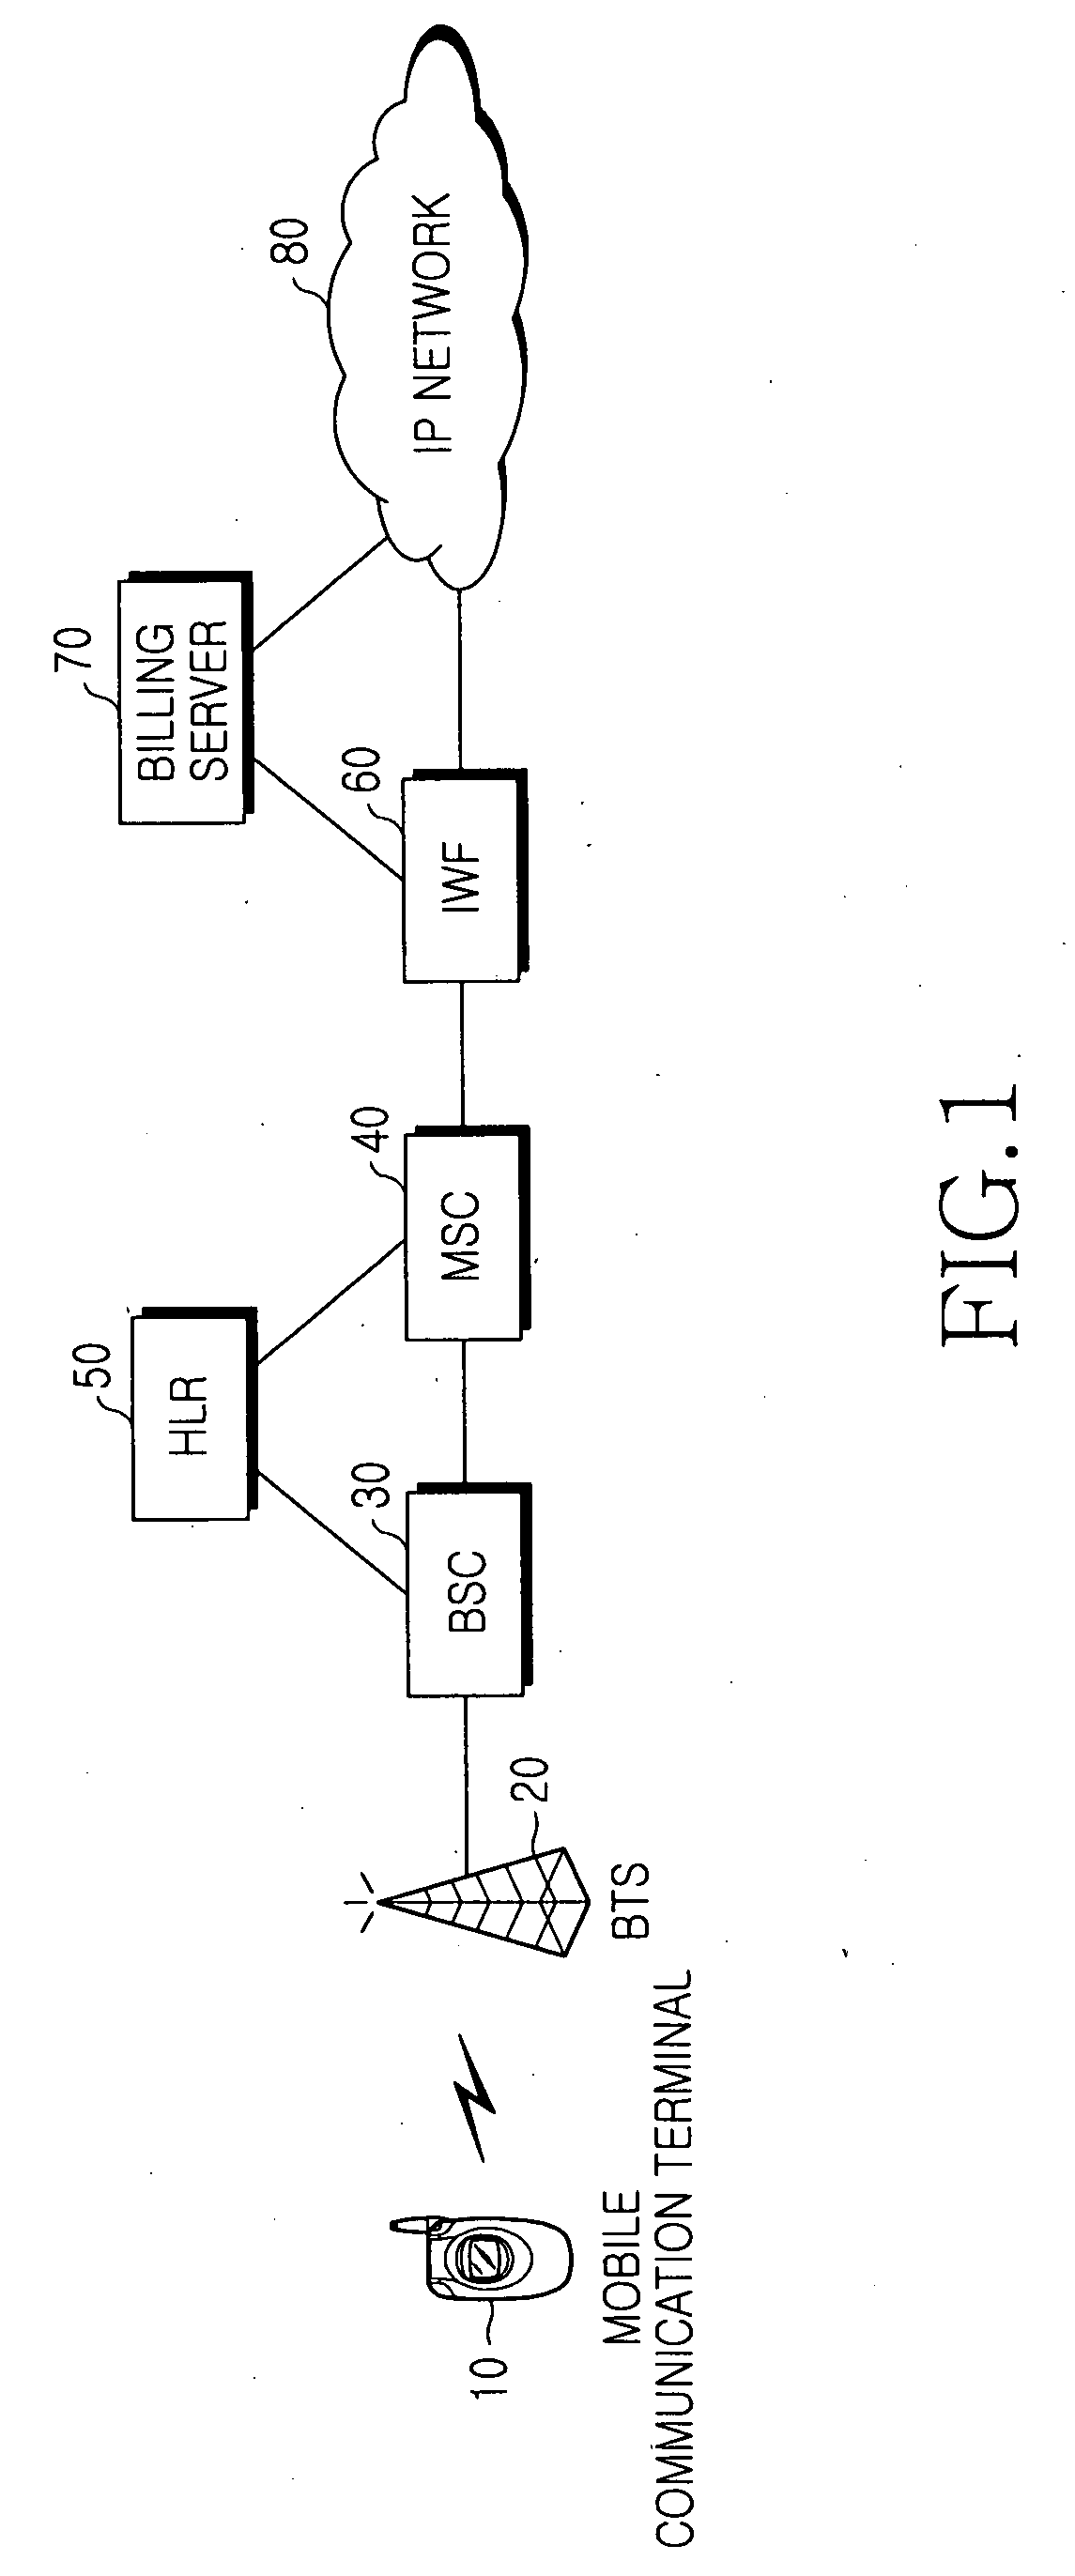 Method and system for providing billing information of wireless data communication service